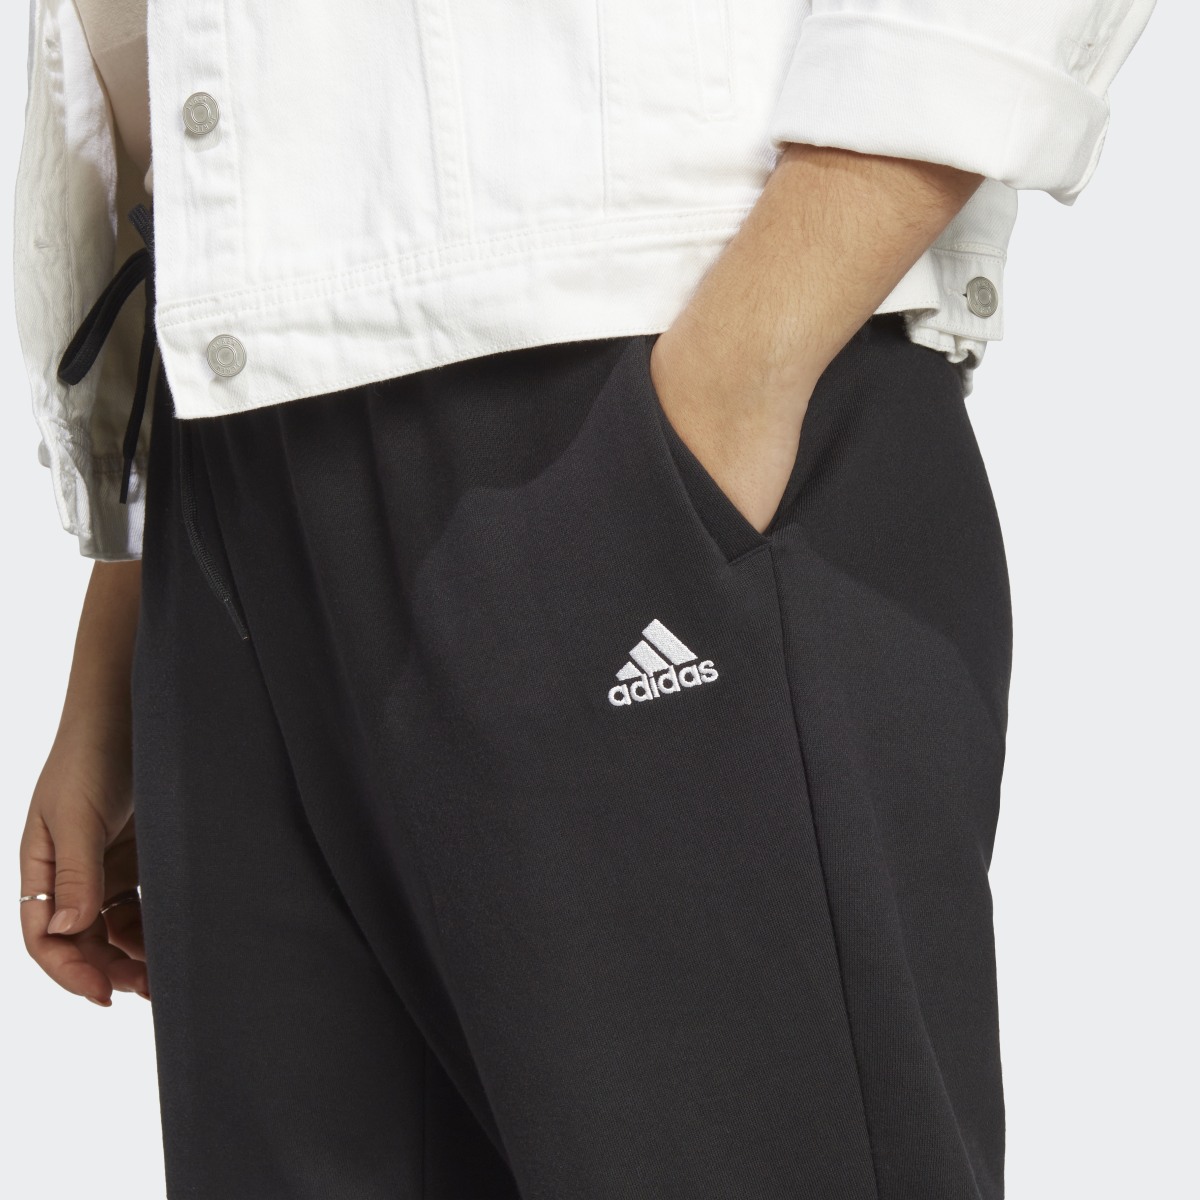 Adidas Essentials Linear French Terry Cuffed Pants (Plus Size). 5